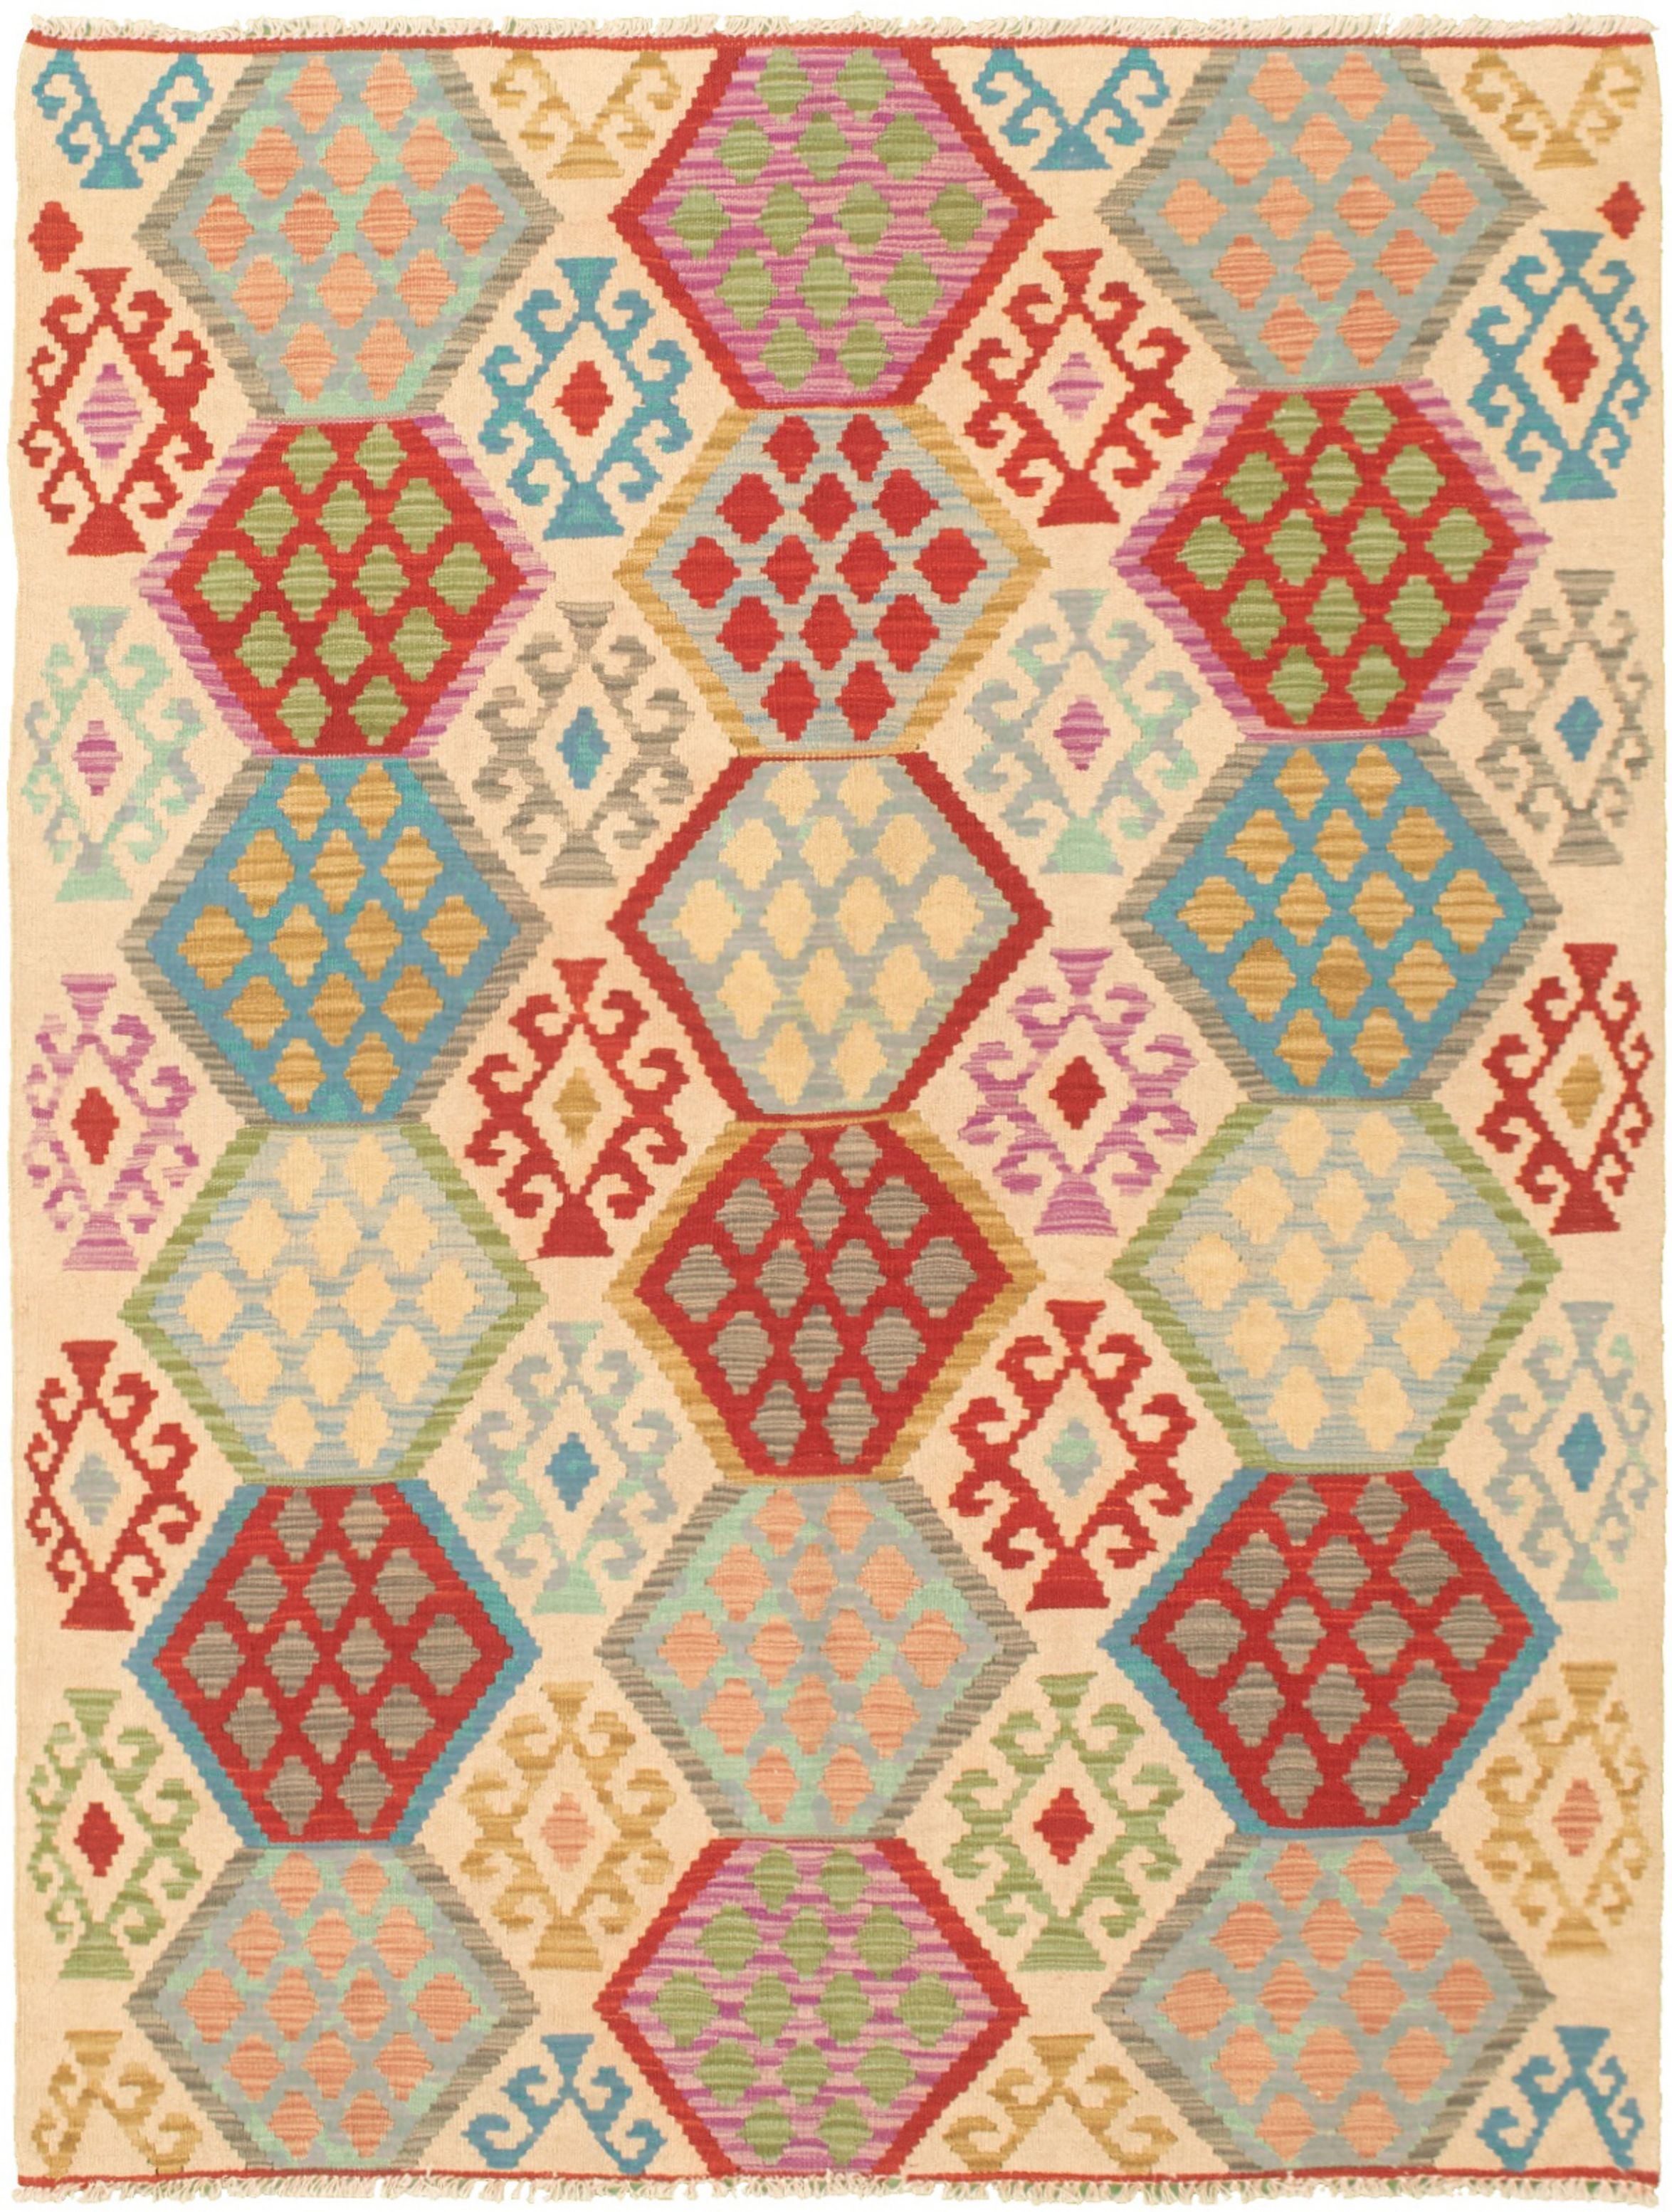 Hand woven Bold and Colorful  Cream  Kilim 5'0" x 6'8" Size: 5'0" x 6'8"  